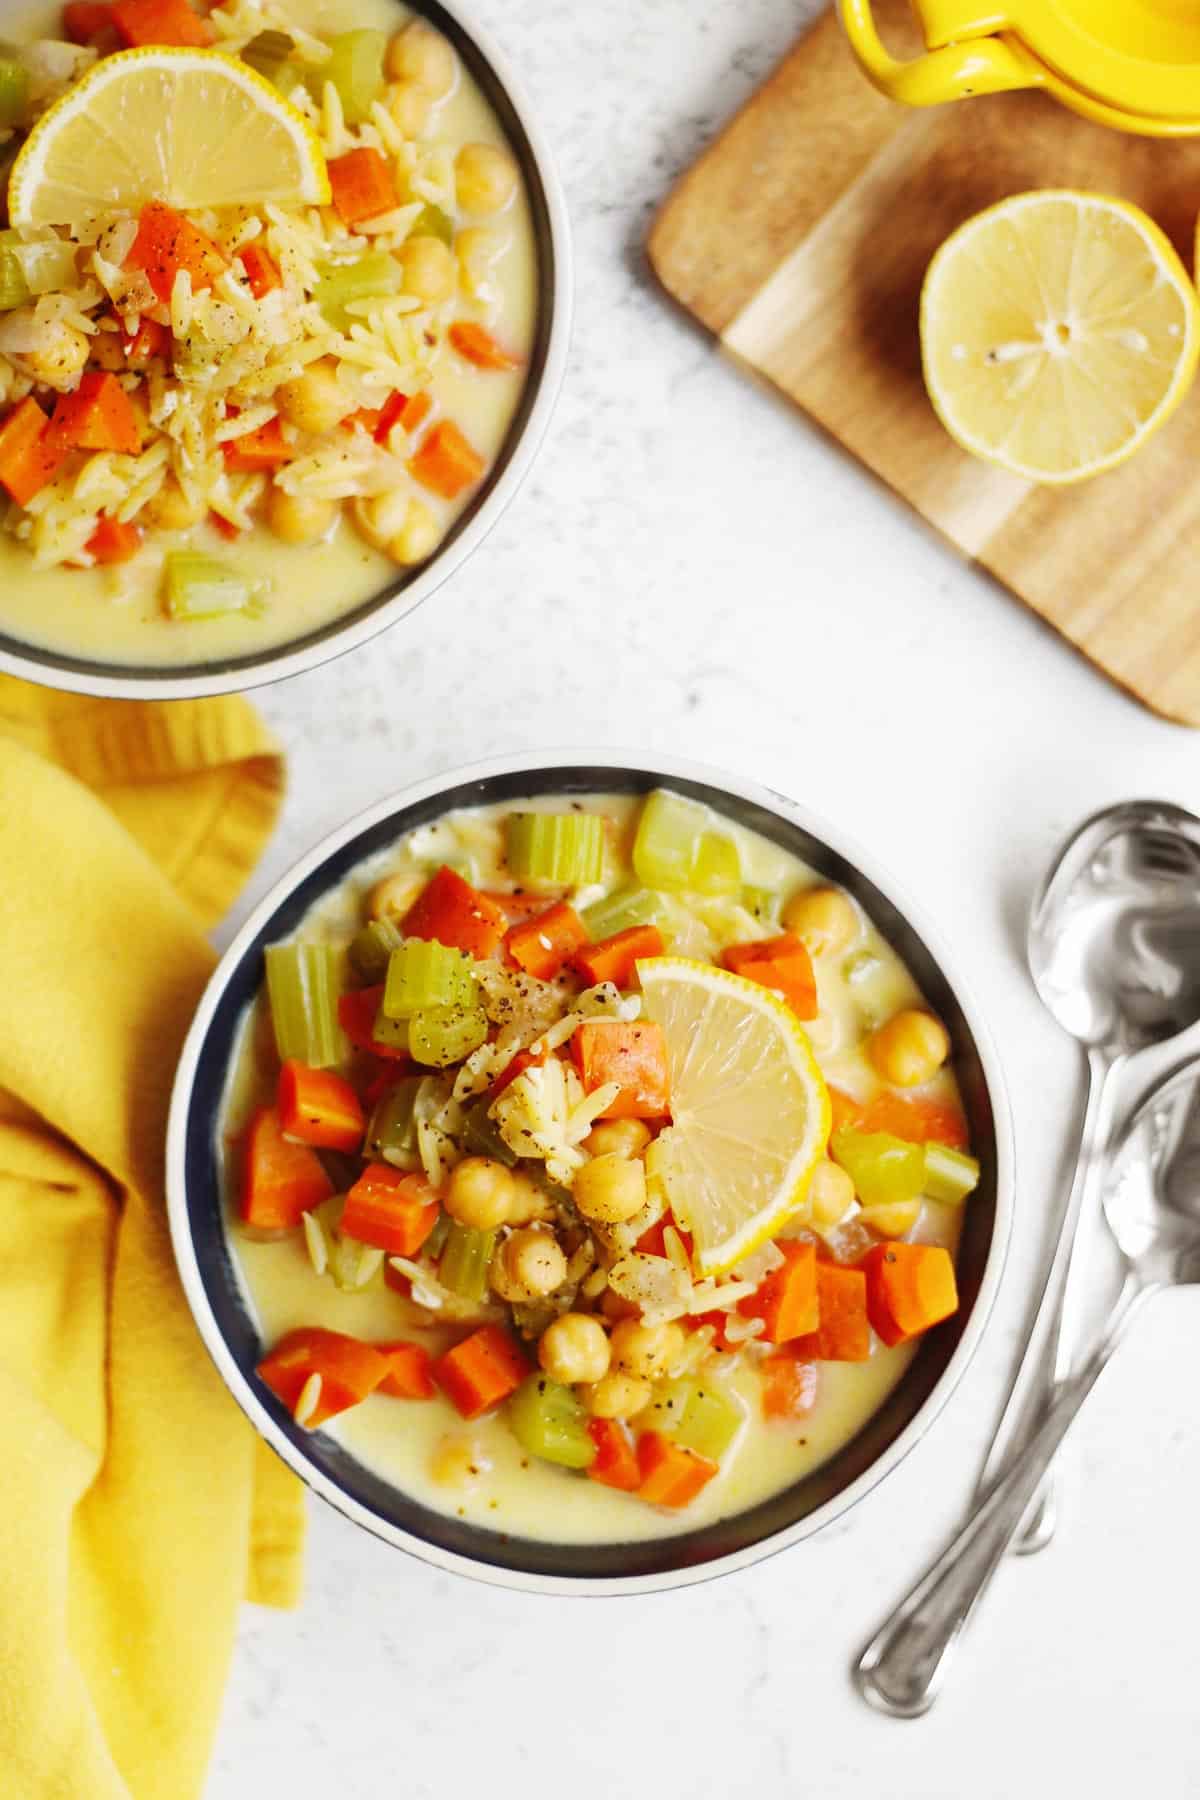 A photo of a bowl of chickpea lemon orzo soup with a lemon slice on top.